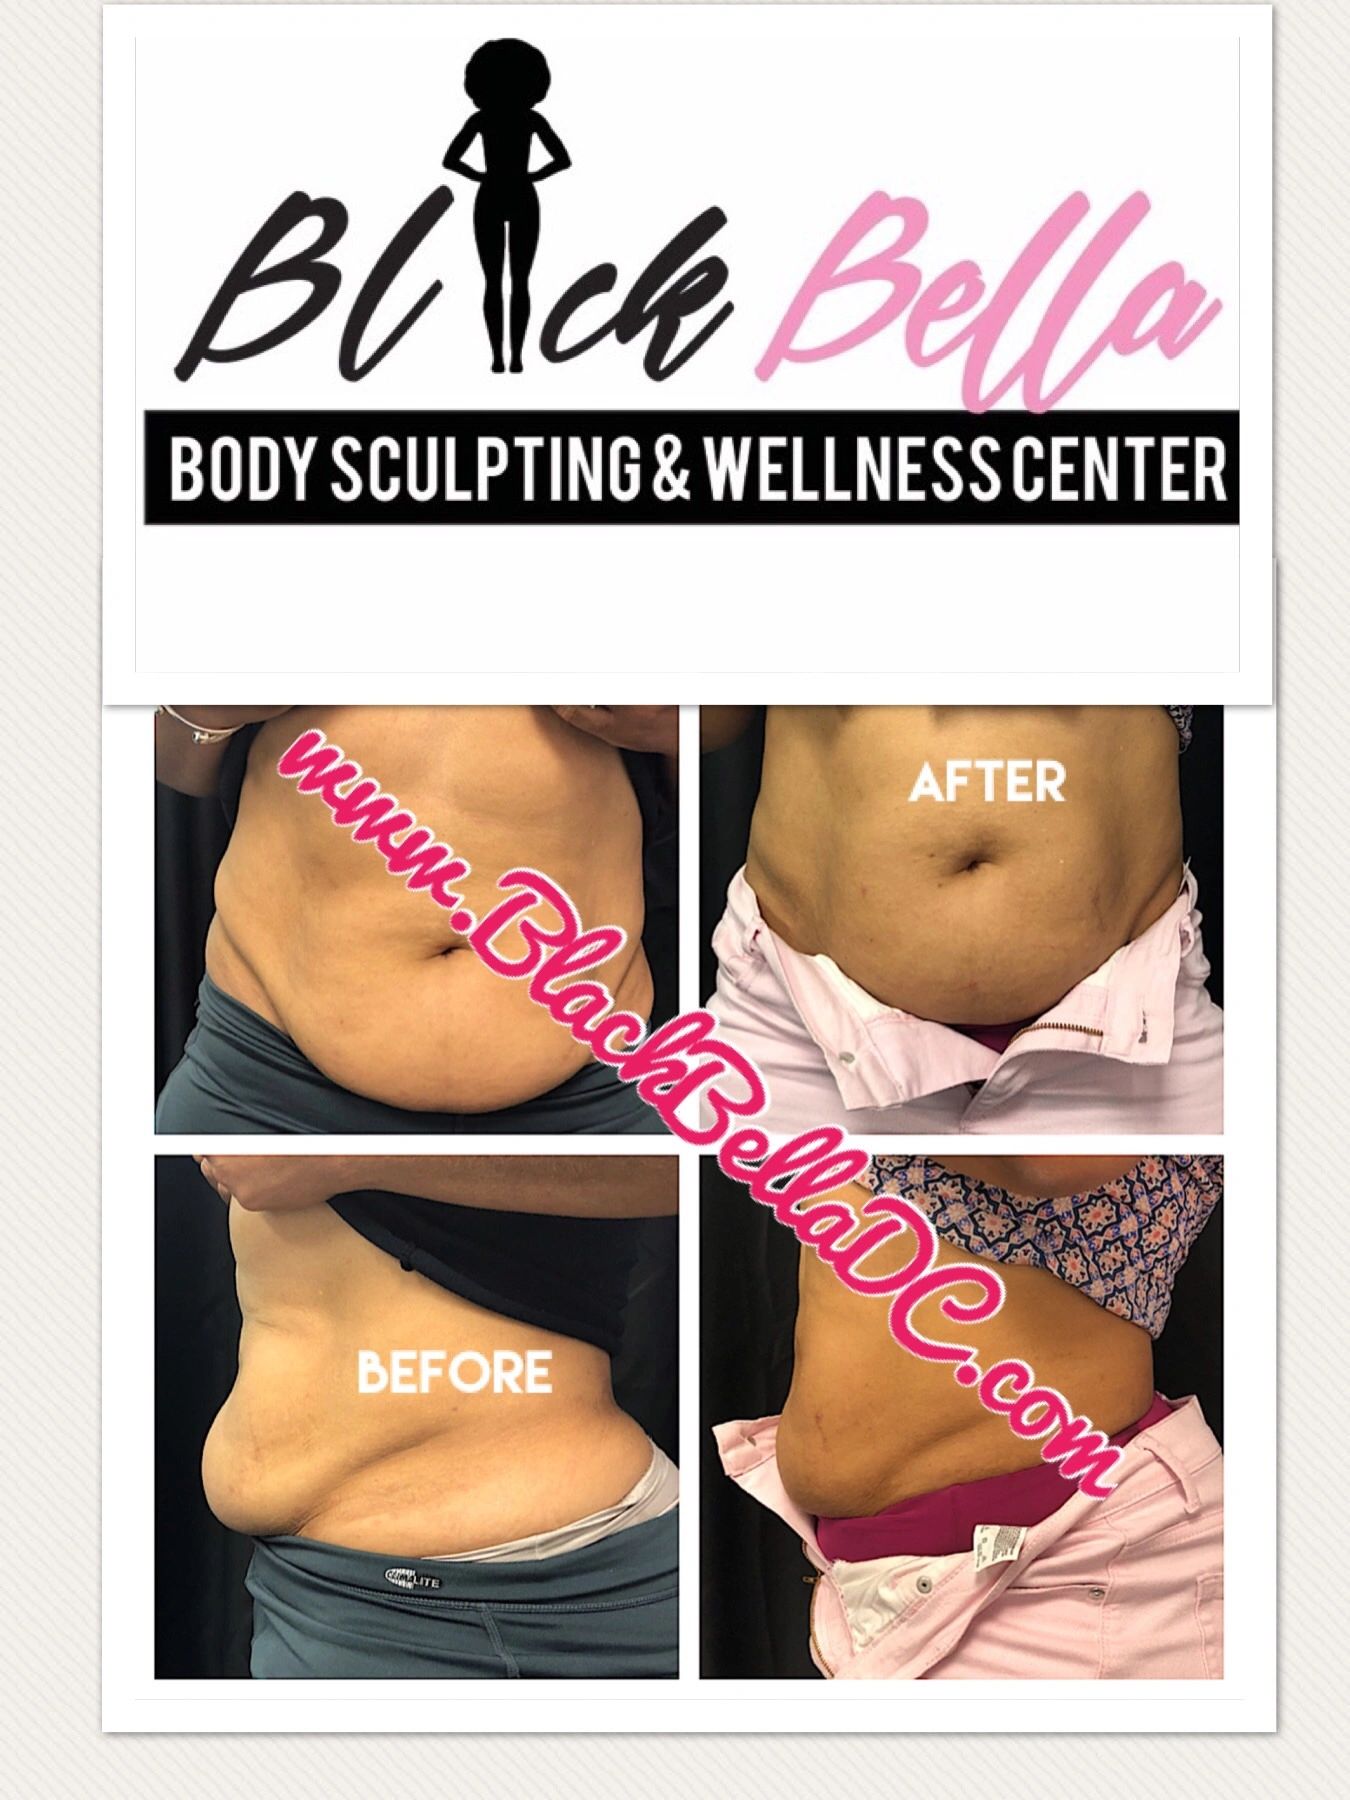 A Bella Bodies before and after! How cool it that? The most divine